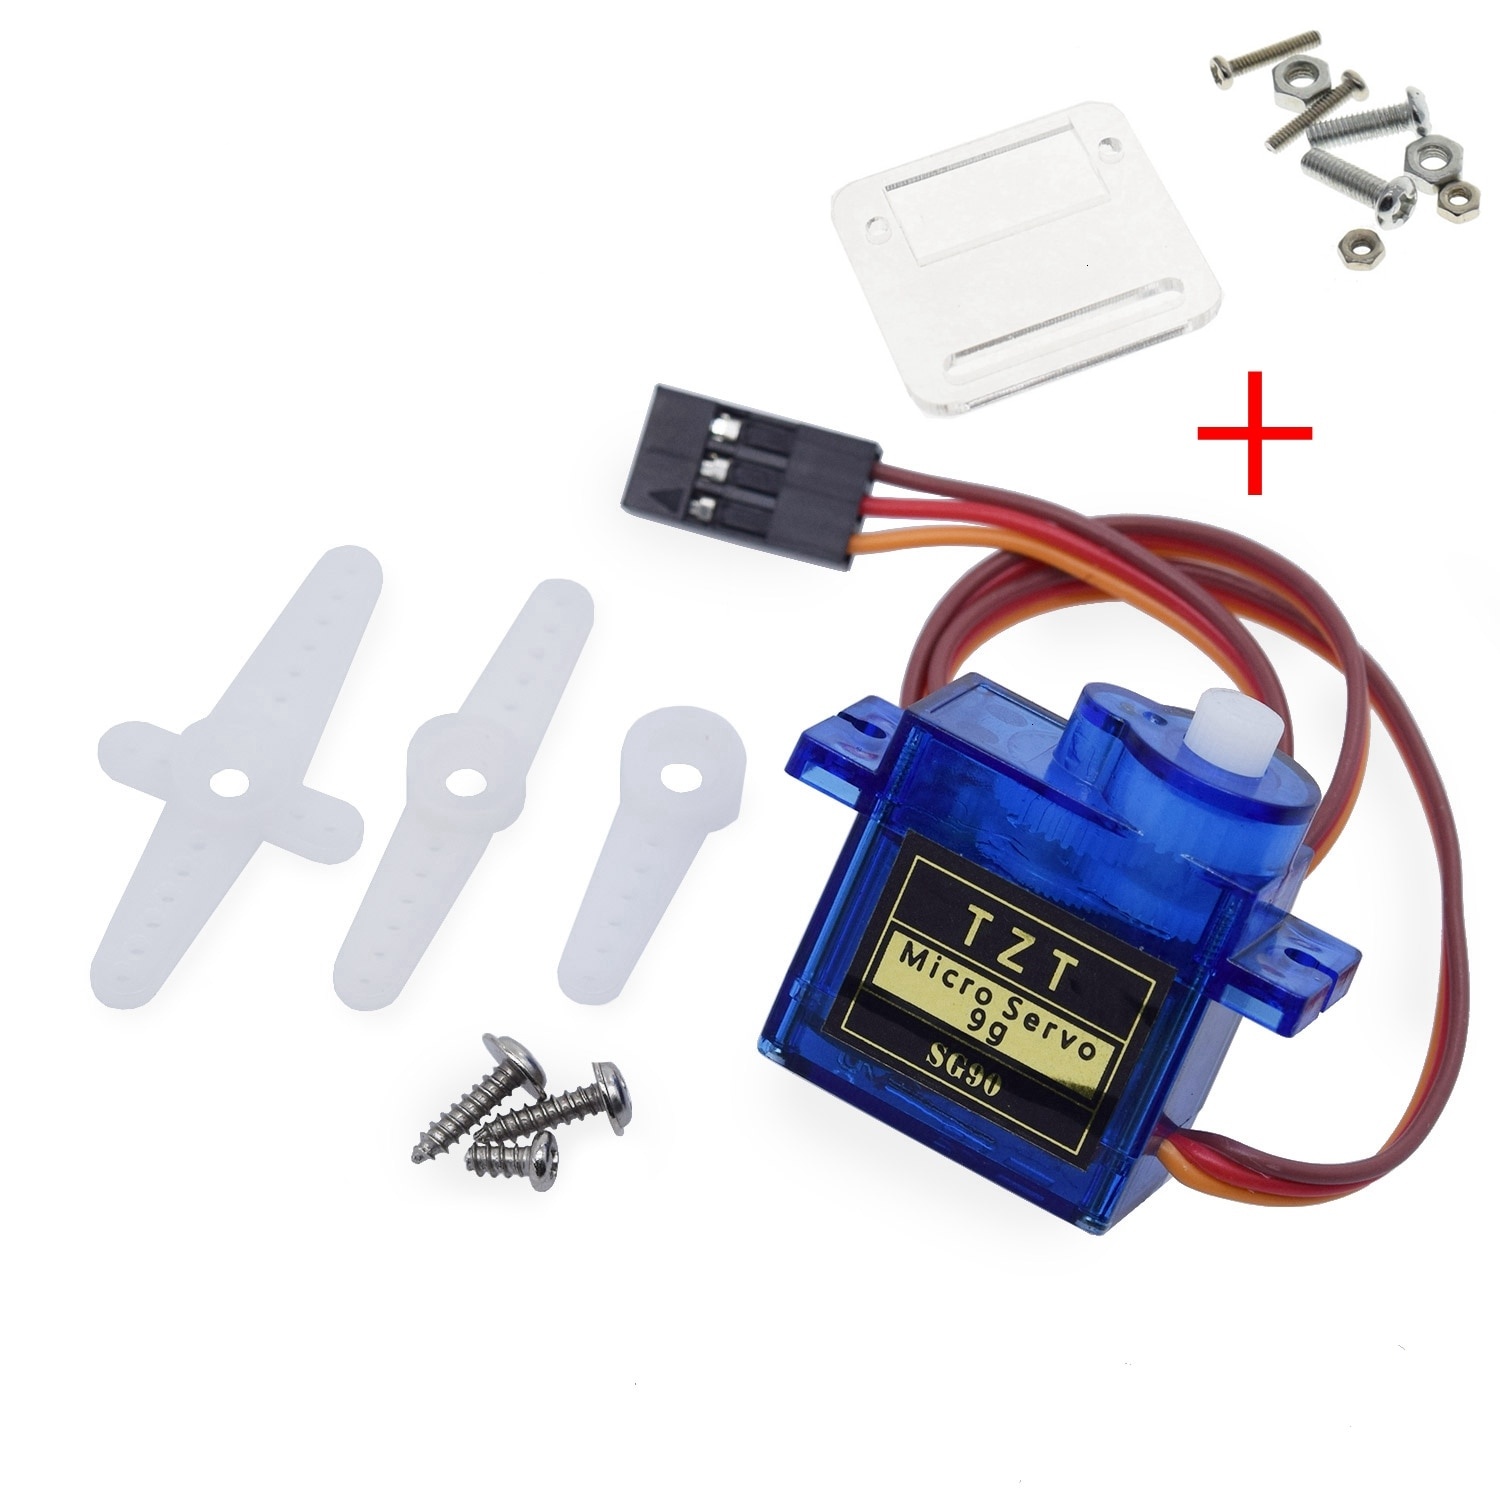 Smart Electronics Rc Mini Micro 9g 1.6KG Servo SG90 for RC 250 450 Helicopter Airplane Car Boat For Arduino DIY